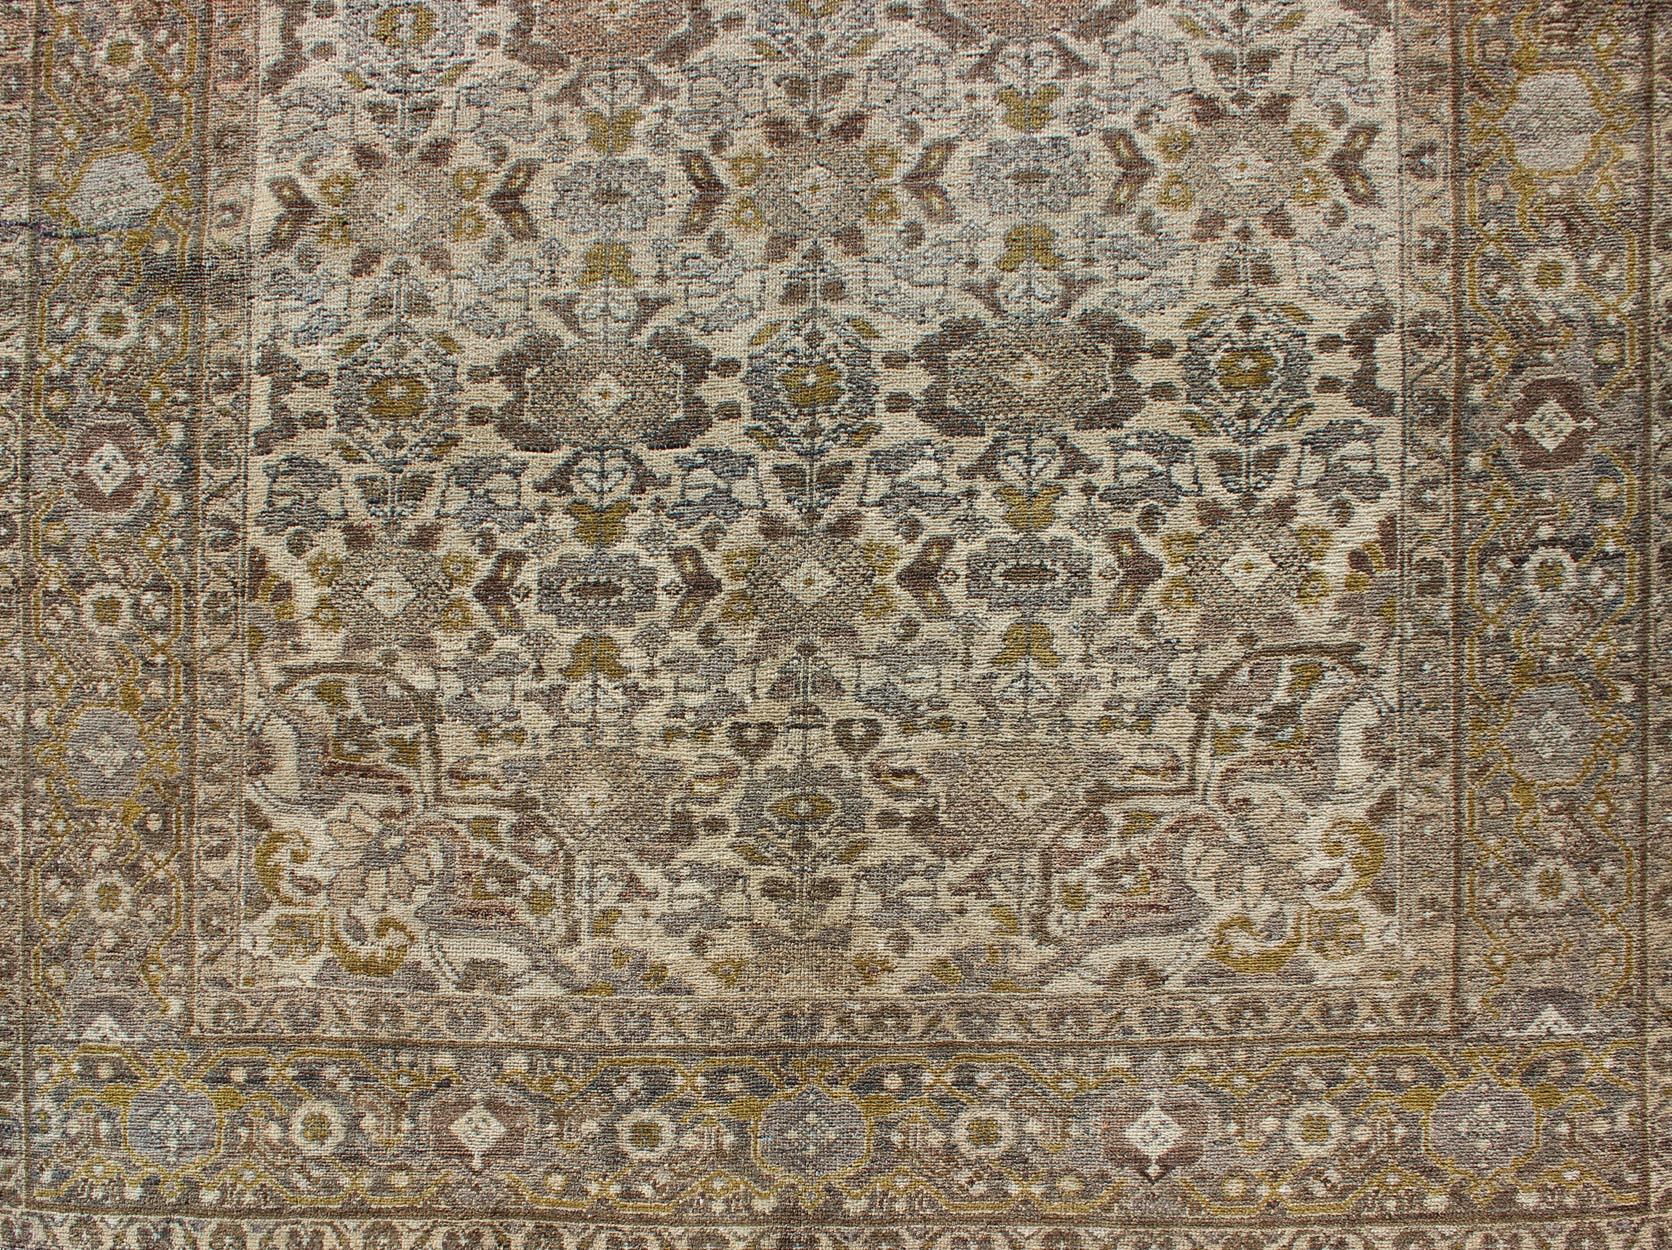 Wool Antique Persian Malayer Rug with All-Over Boteh Design in Earth Tones